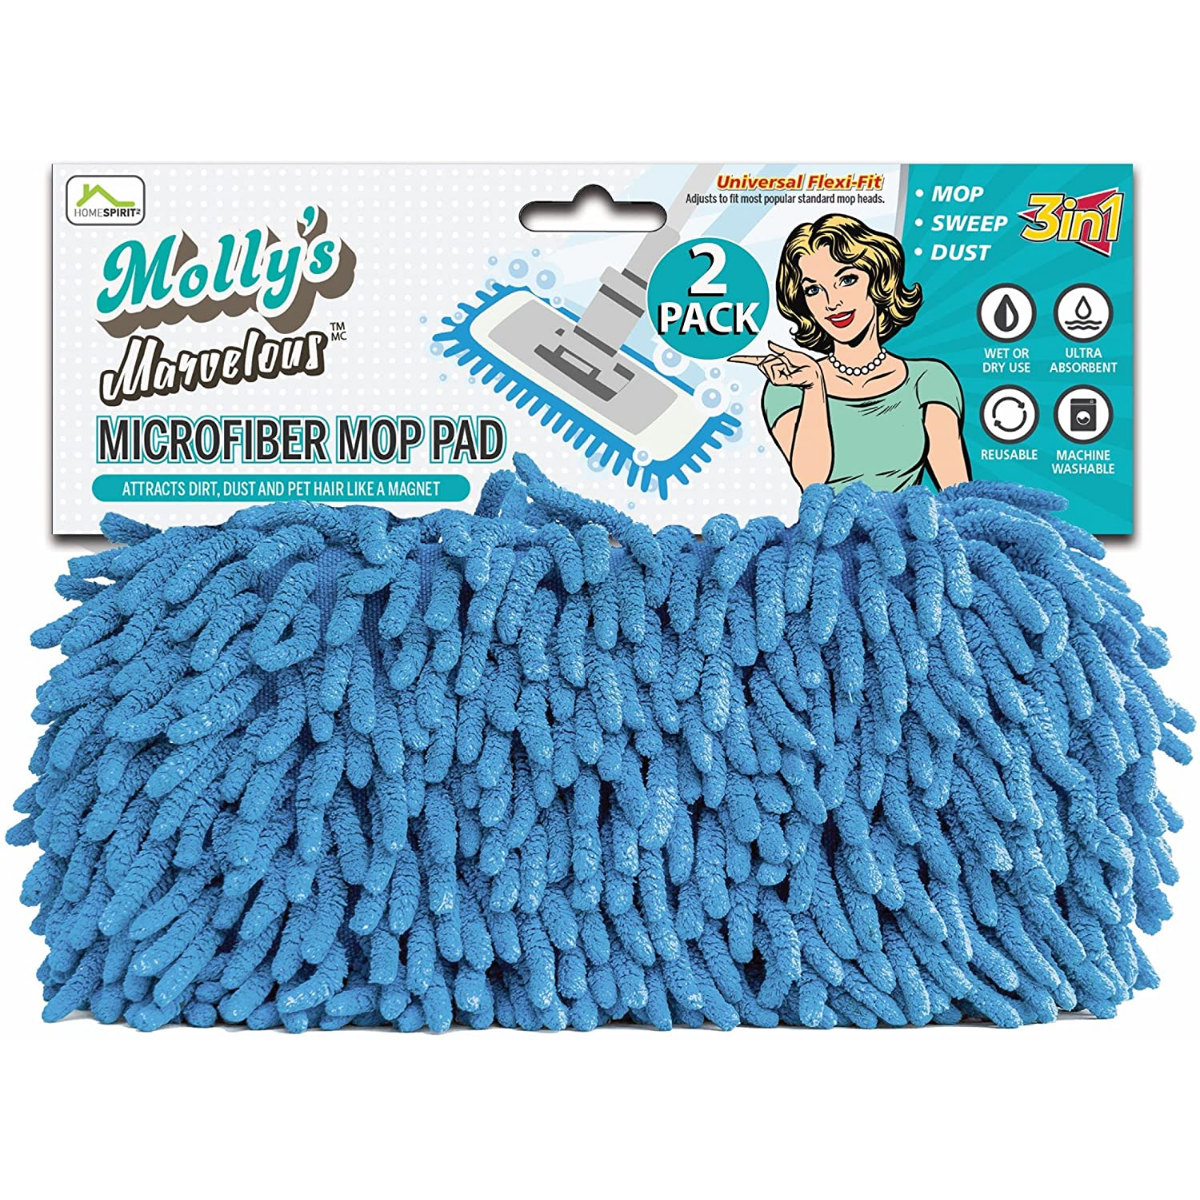 Molly's Marvelous Microfiber Mop Pad Two Pack